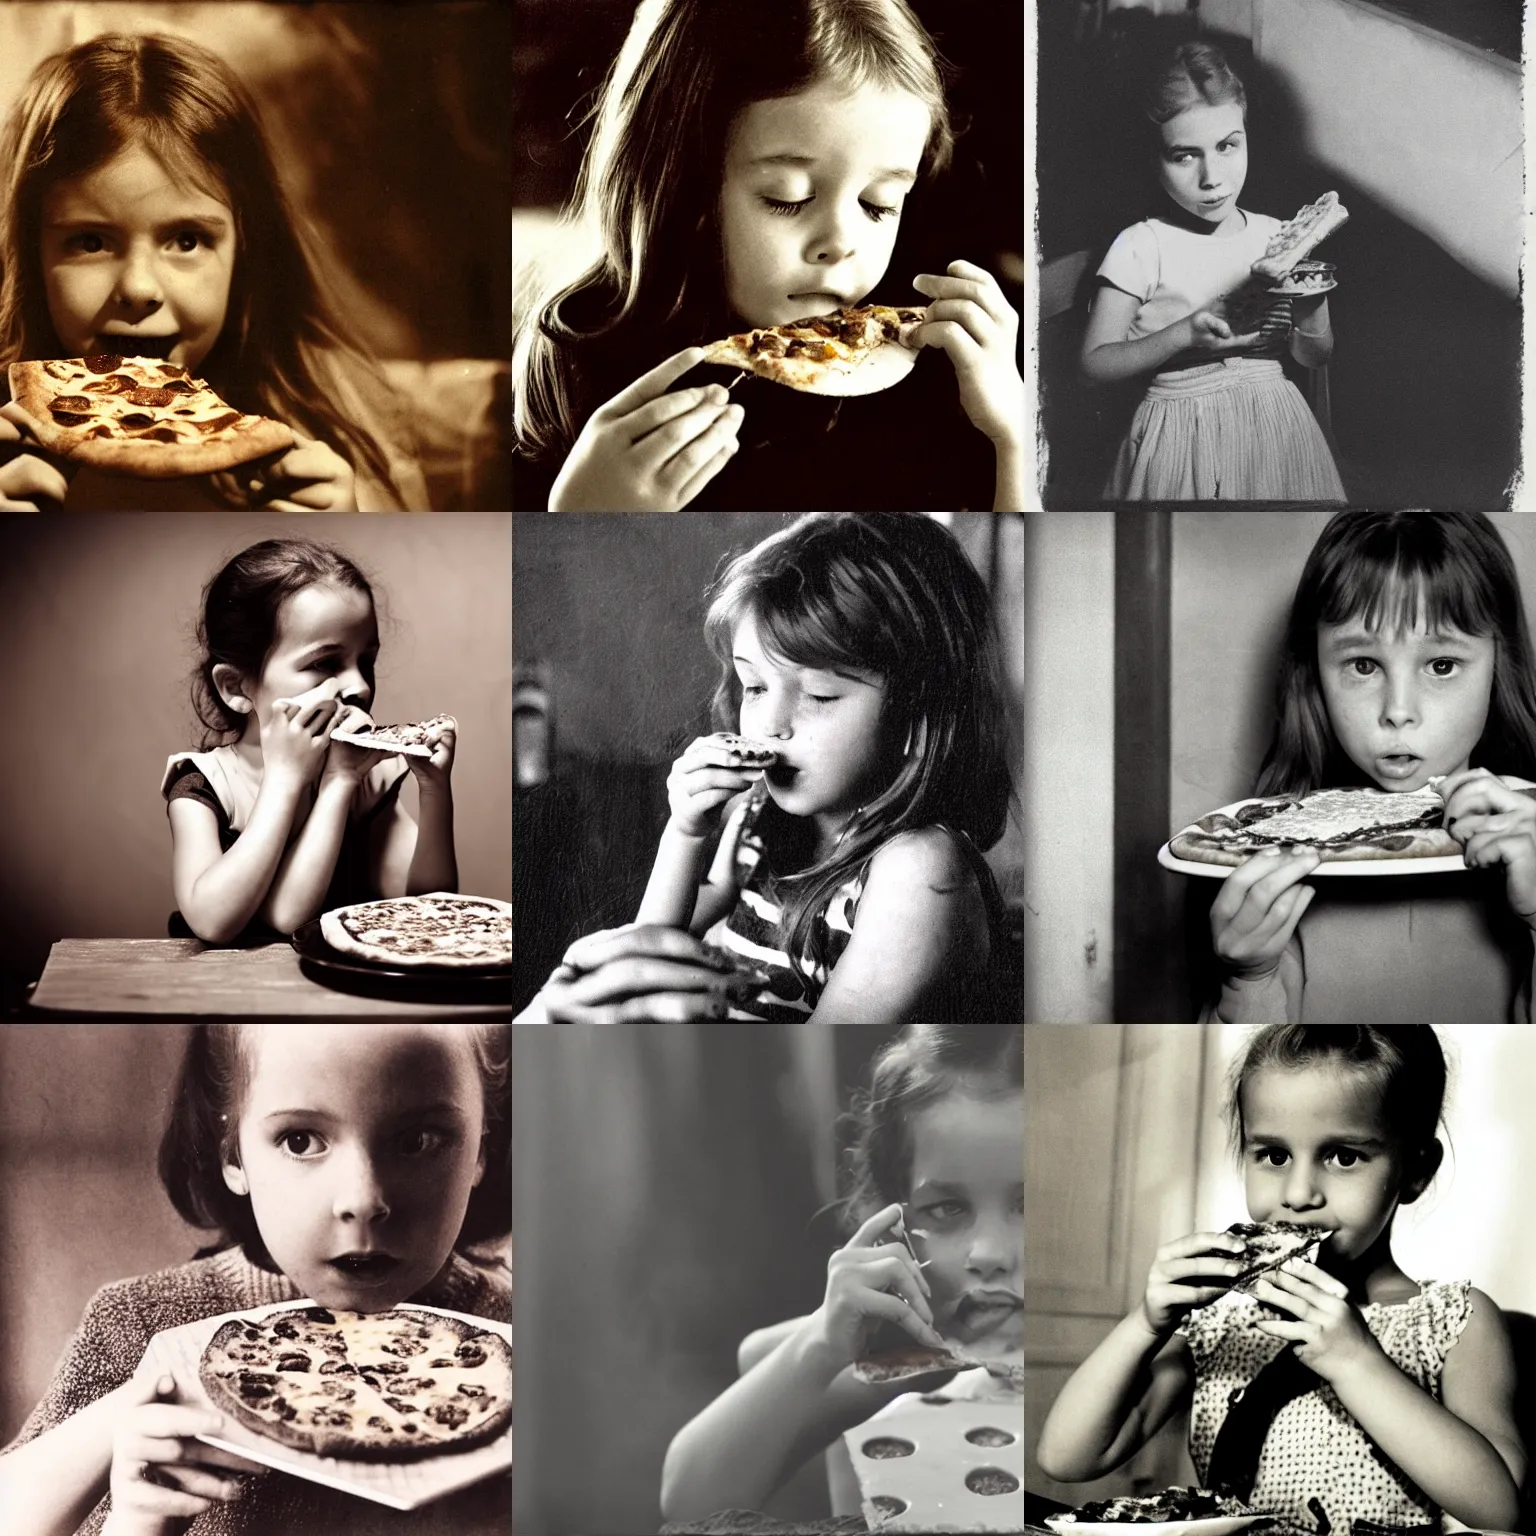 Prompt: a young girl eating a very tasty looking slice of pizza, old movie, sepia